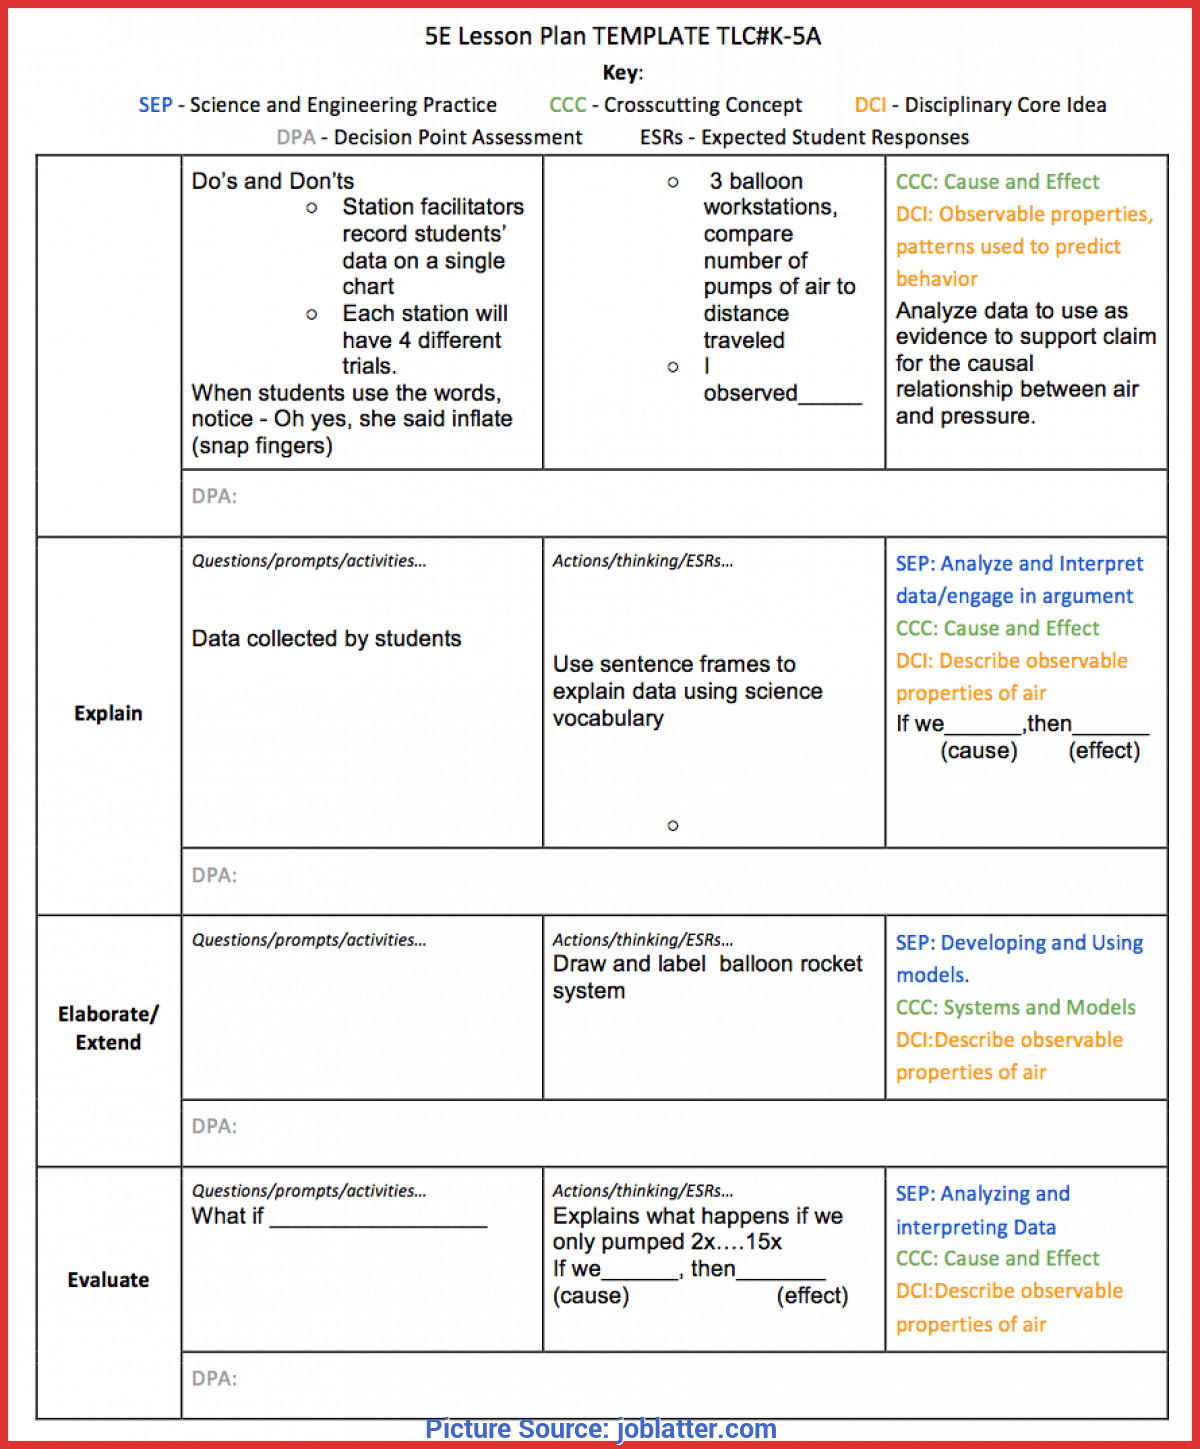 5e Lesson Plan Examples 5e Lesson Plan Instruction Model and Application